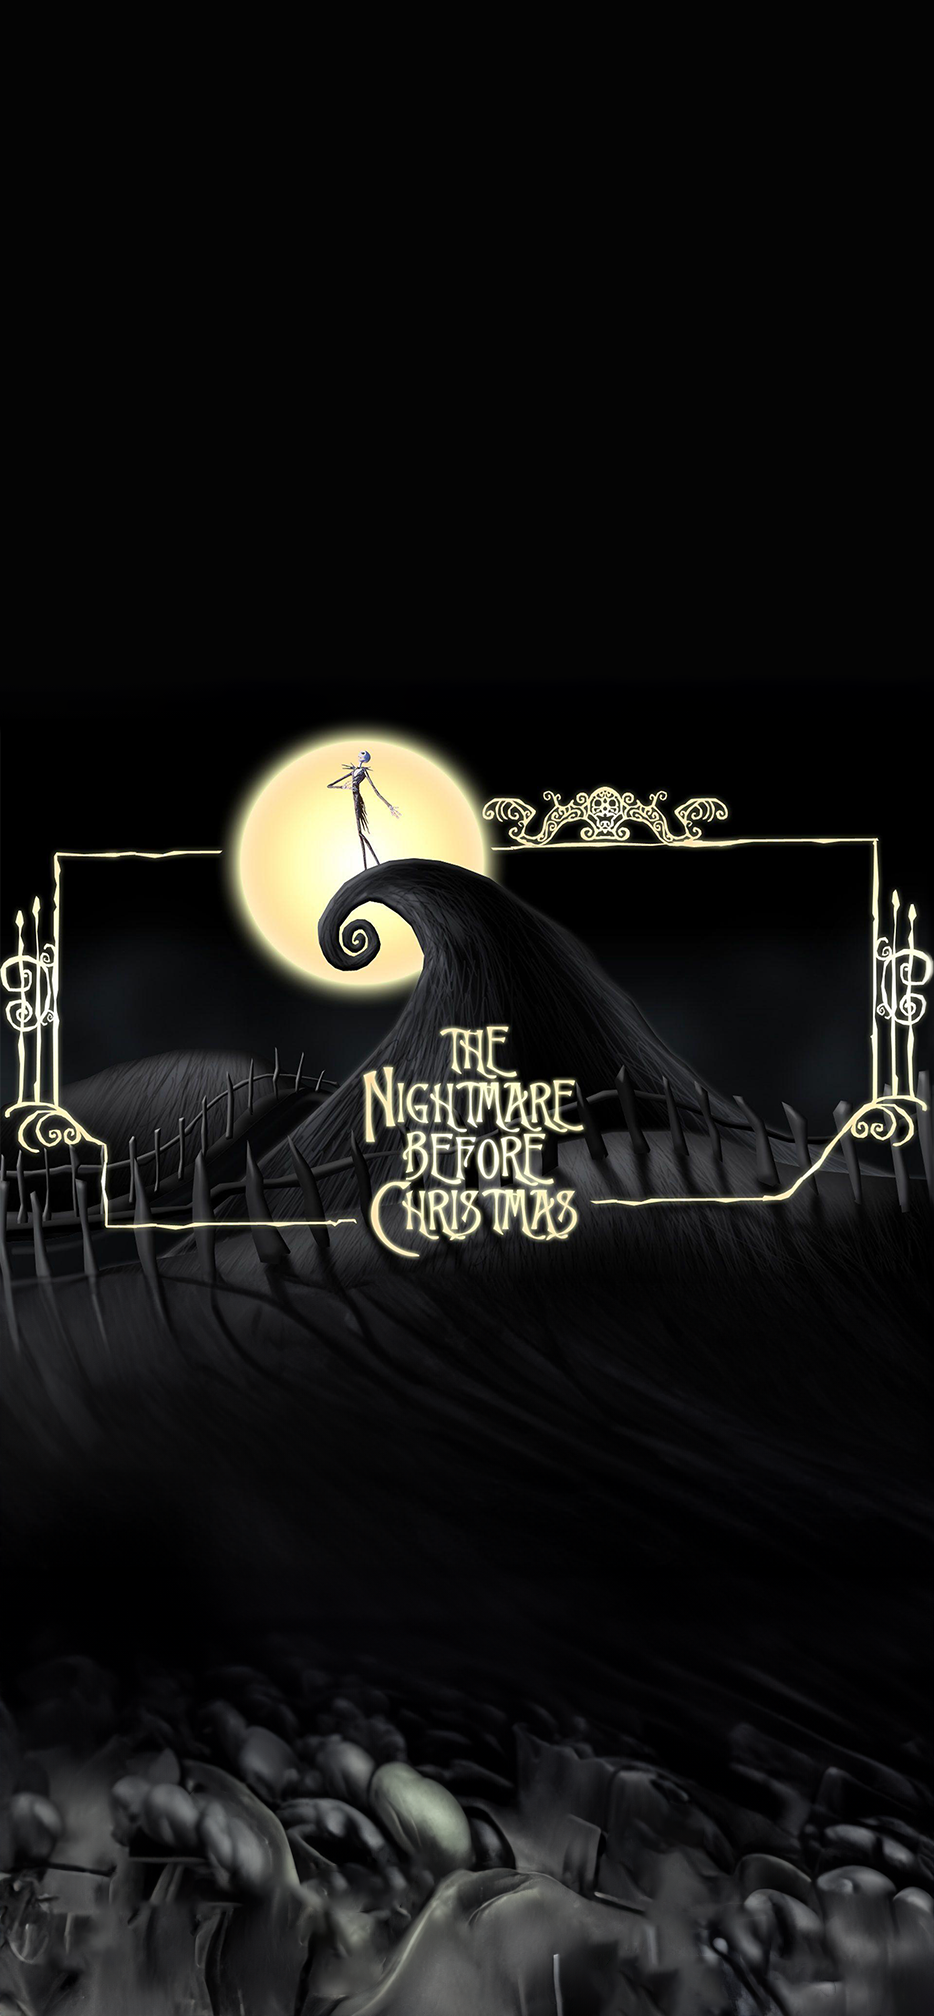 The Nightmare Before Christmas Full Moon Black Front Door Cover Banner Wrap